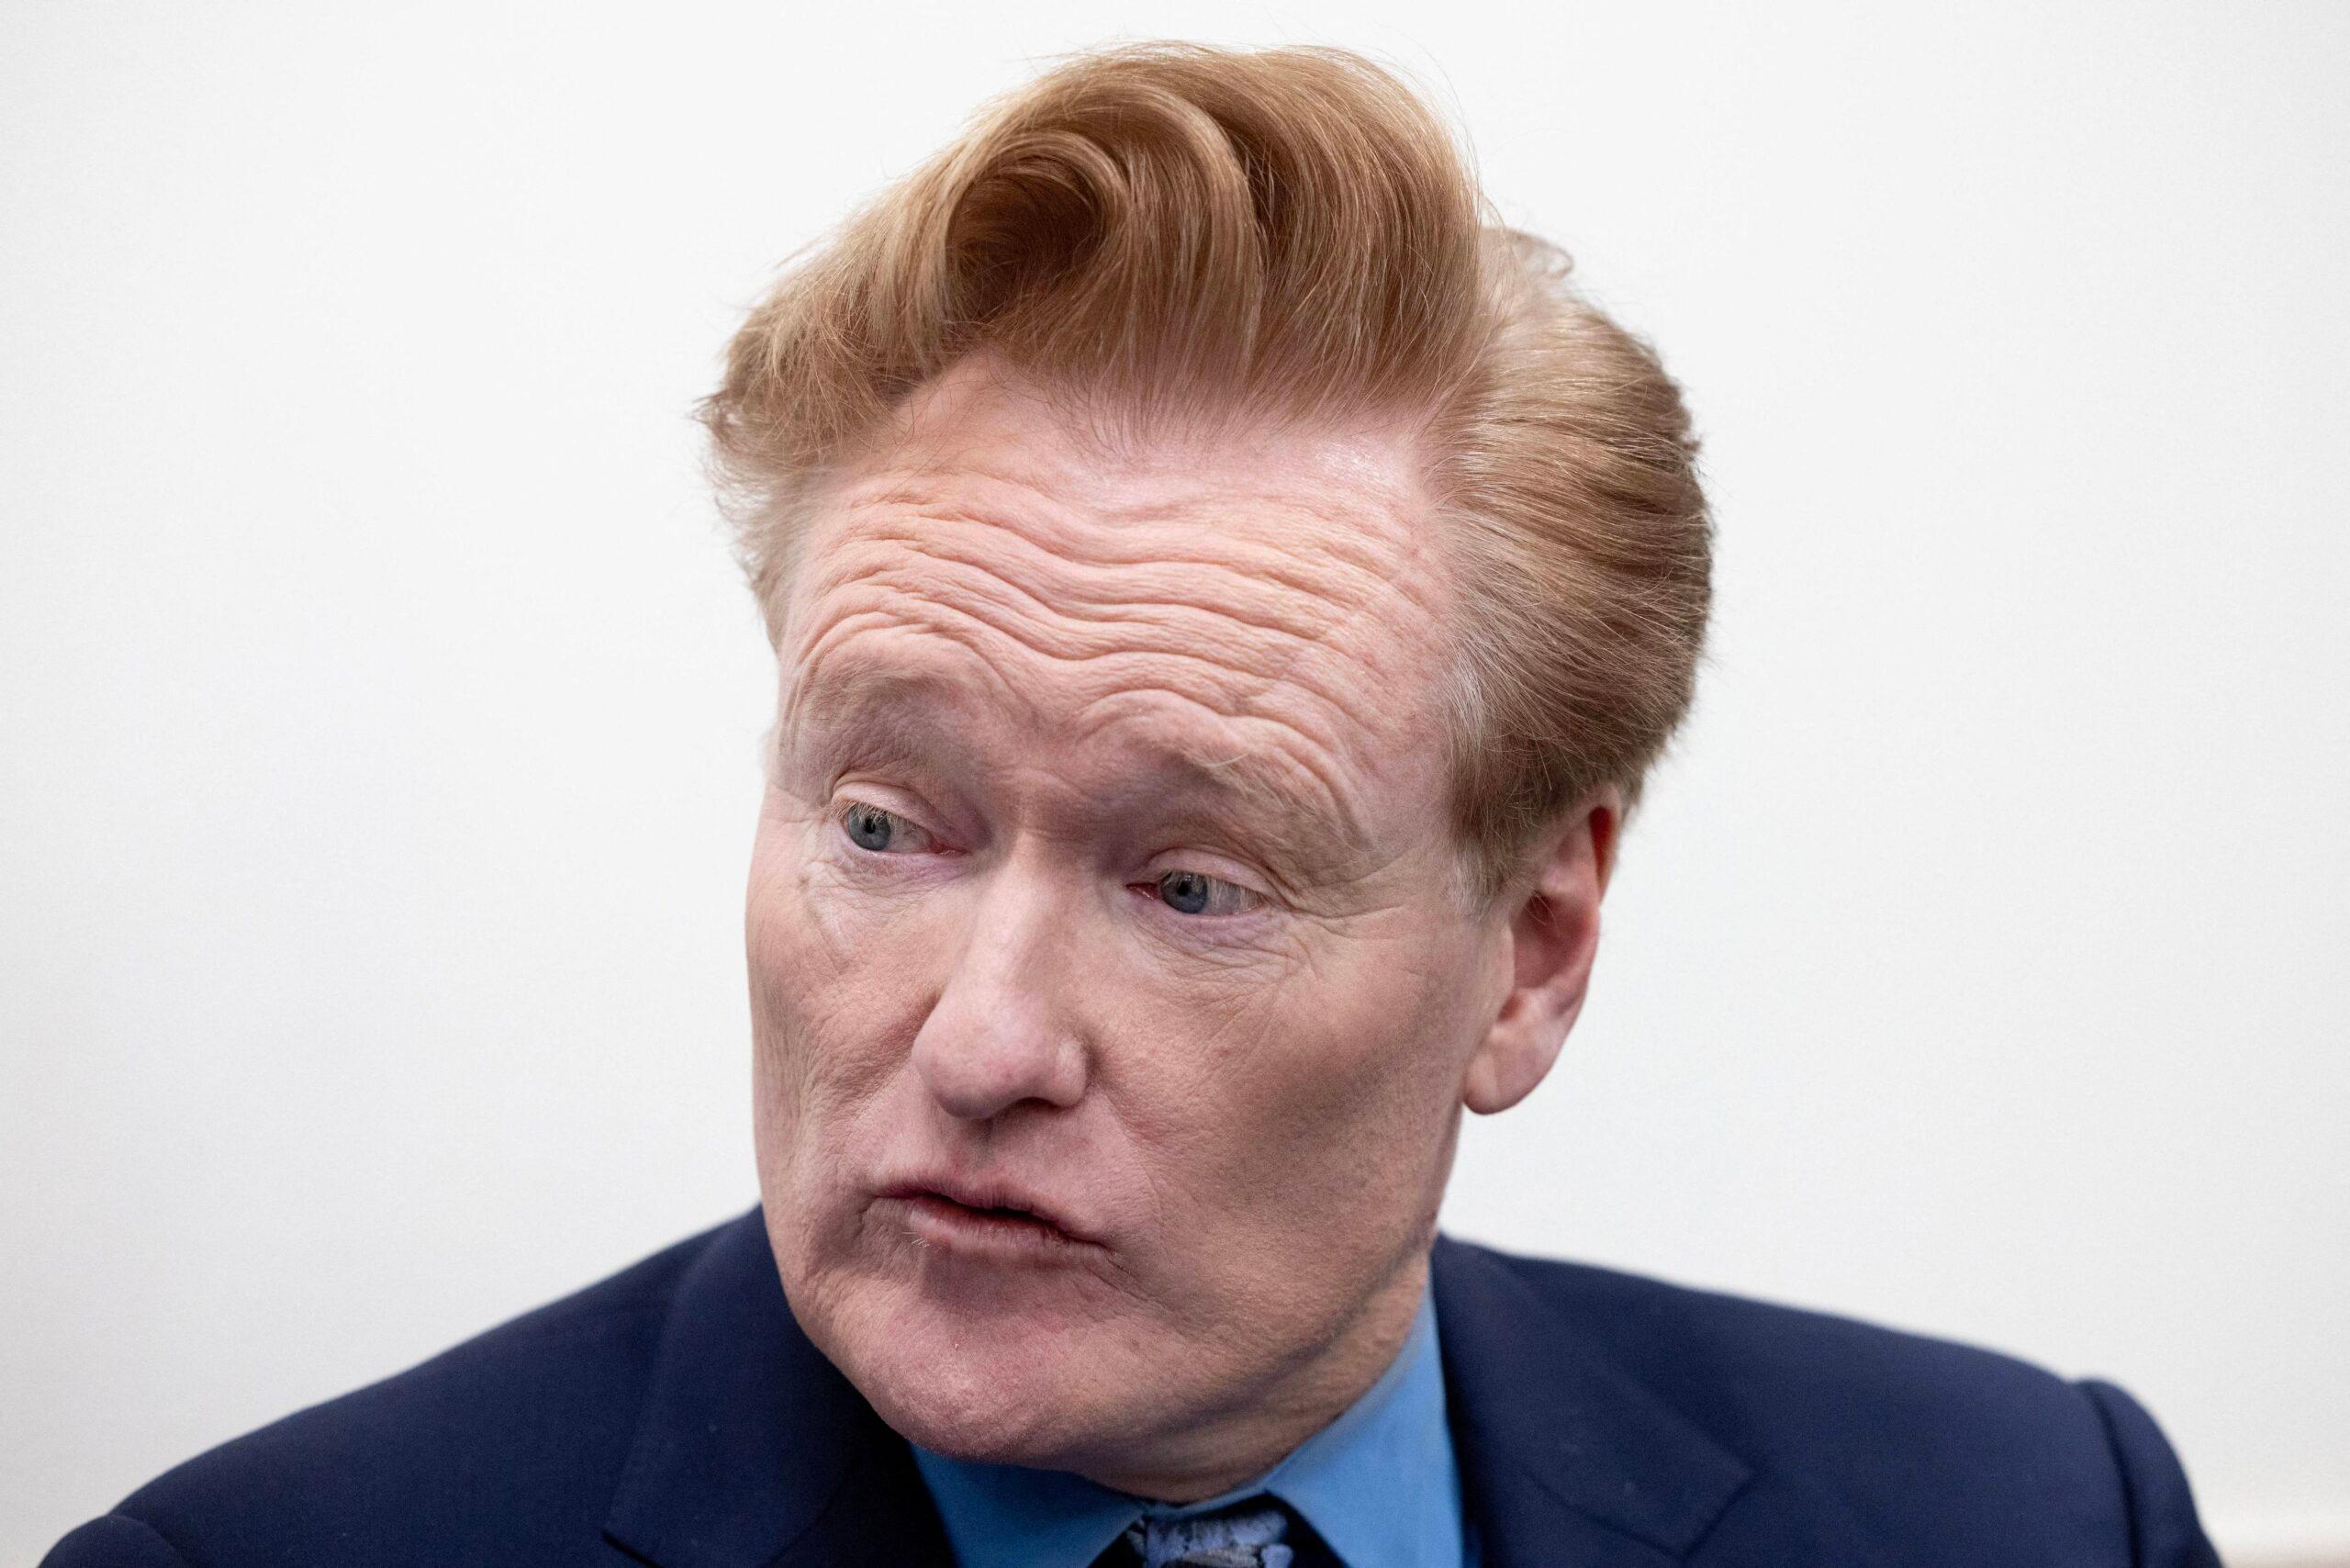 Conan O'Brien Fired From 'The Tonight Show'